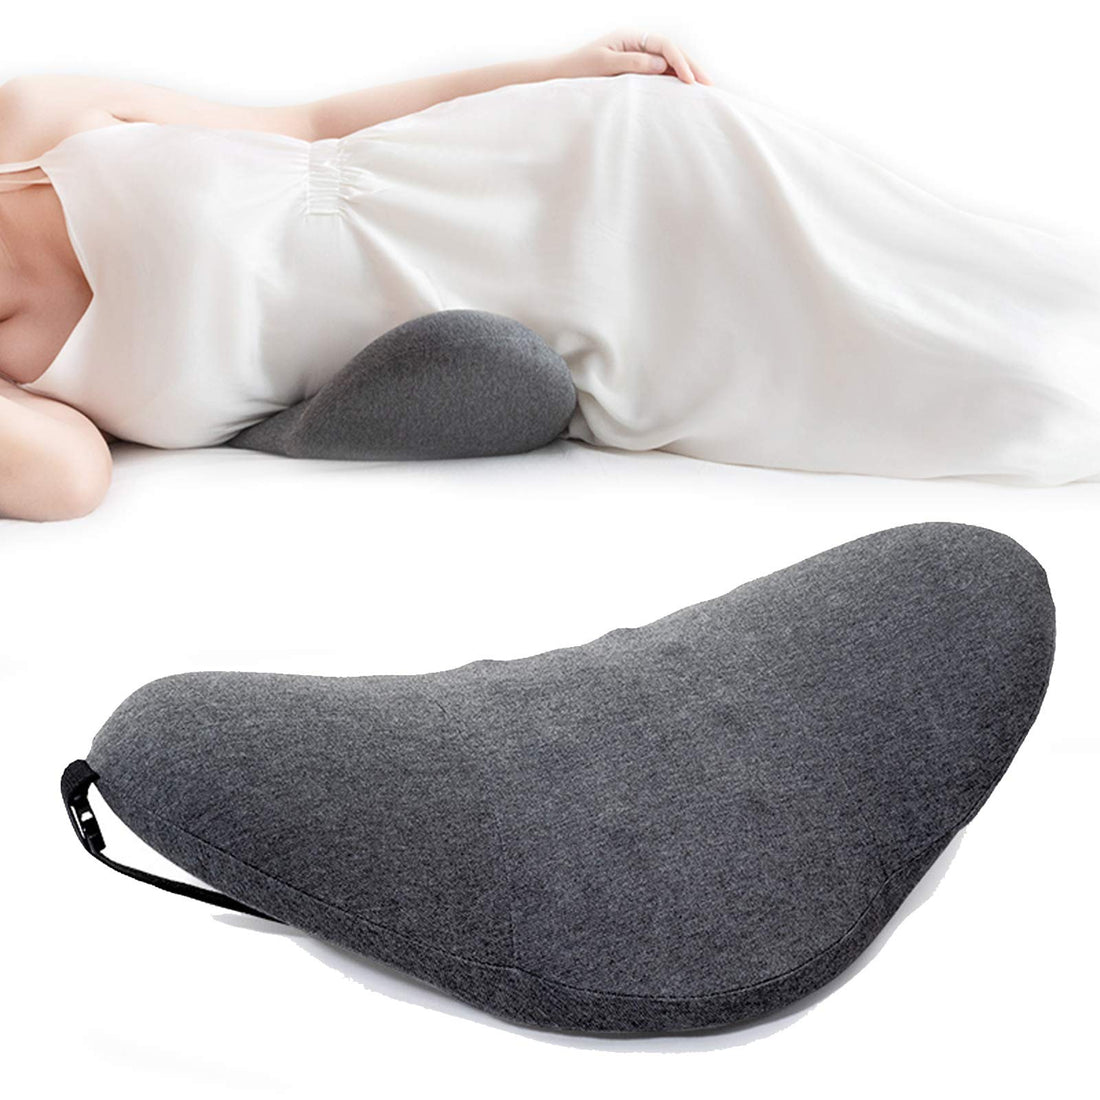 Finally, an Assistive Device That Actually Assists! - Part 4 - Lumbar Support Pillow for Bed